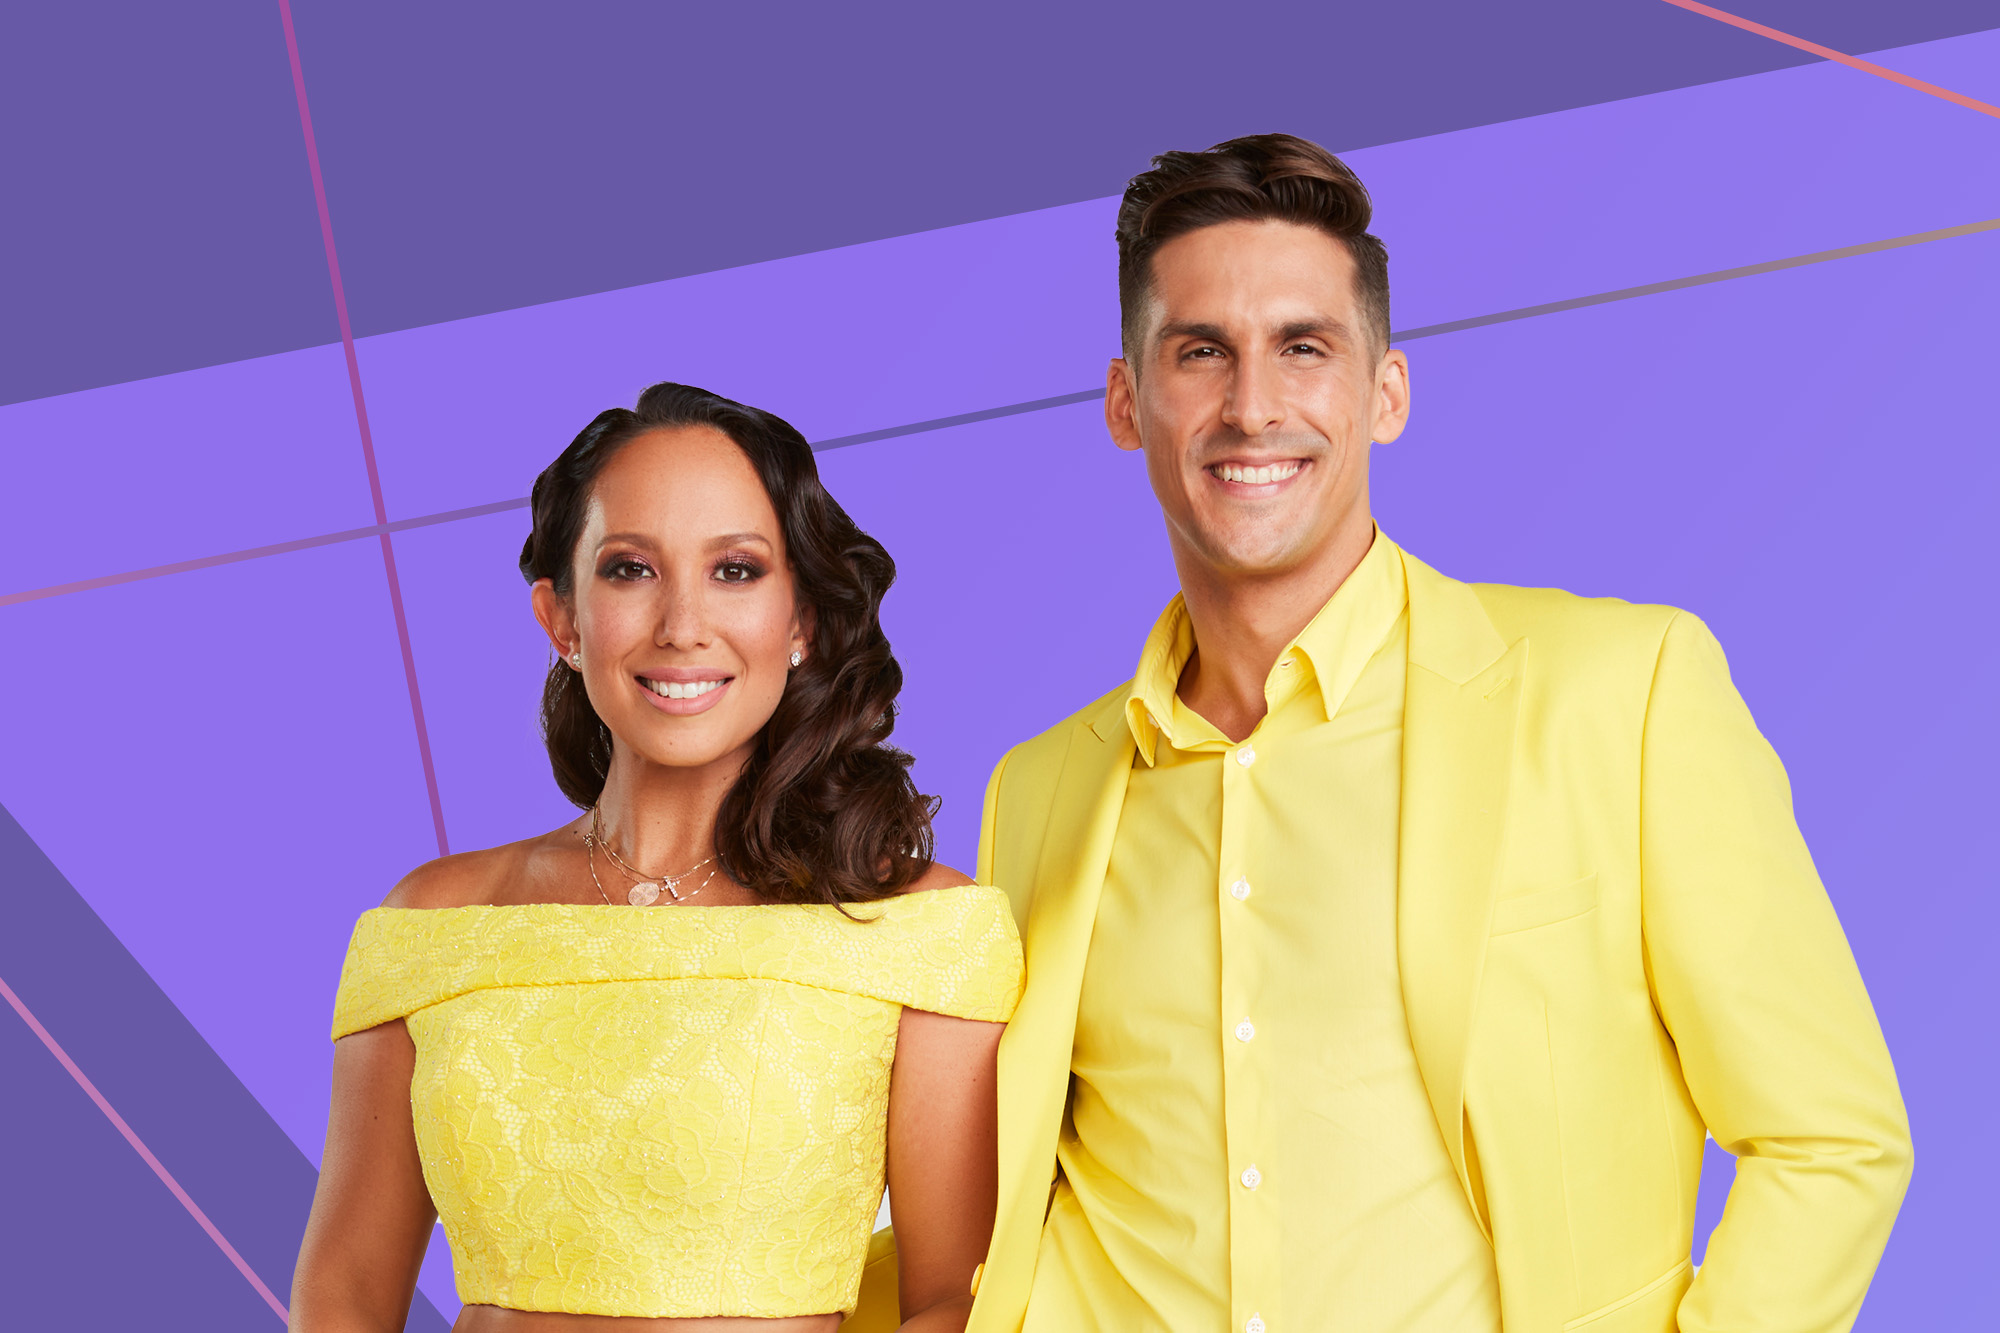 Dancing With The Stars Updates: Cody Rigsby Dishes On His Future With Cheryl Burke